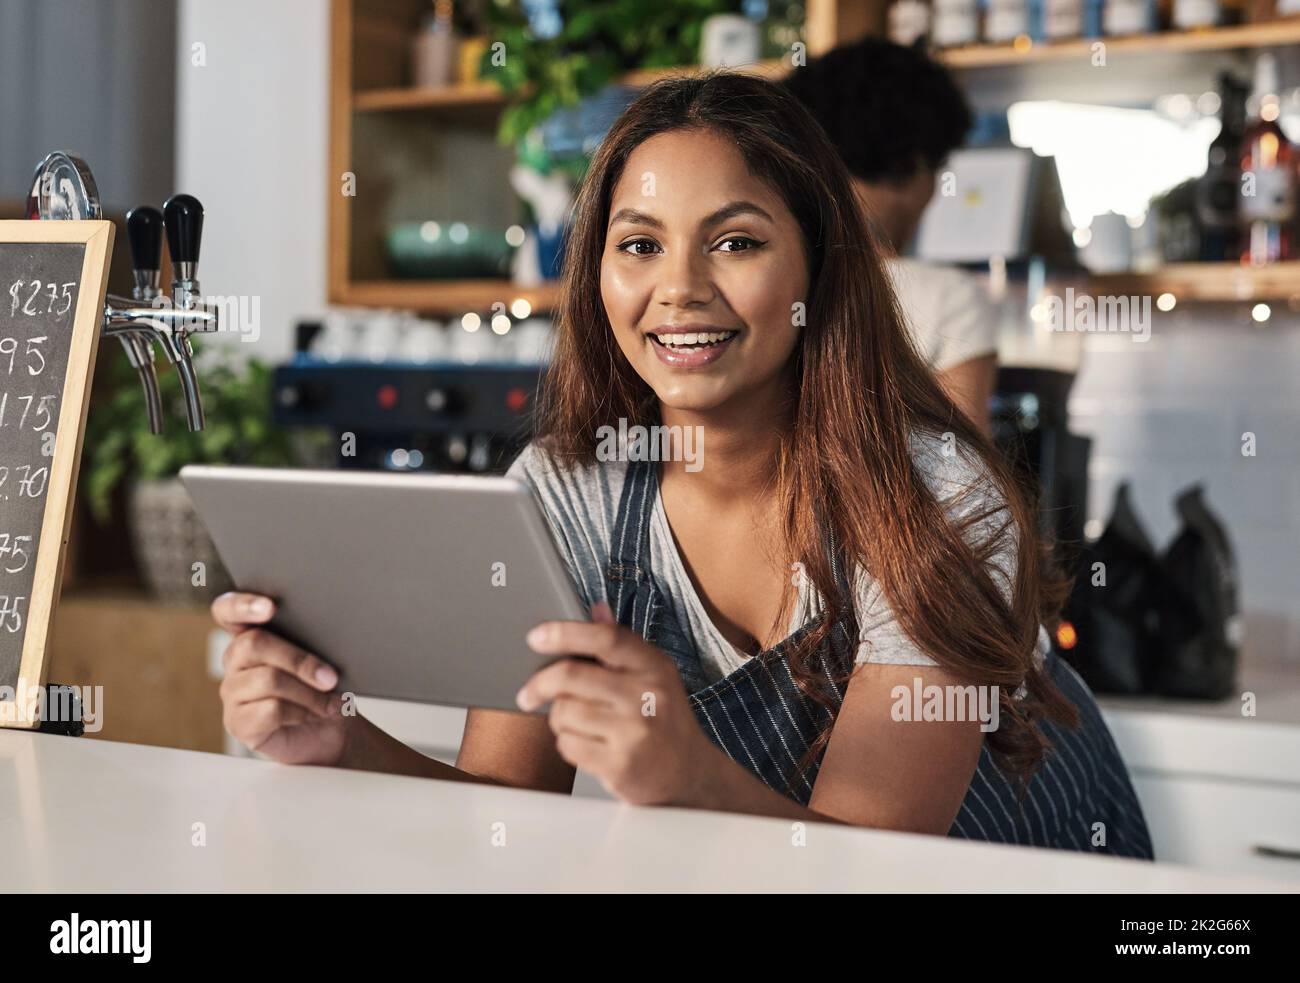 Technology is an integral part of how restaurants operate. Portrait of a young woman using a digital tablet while working in a cafe. Stock Photo